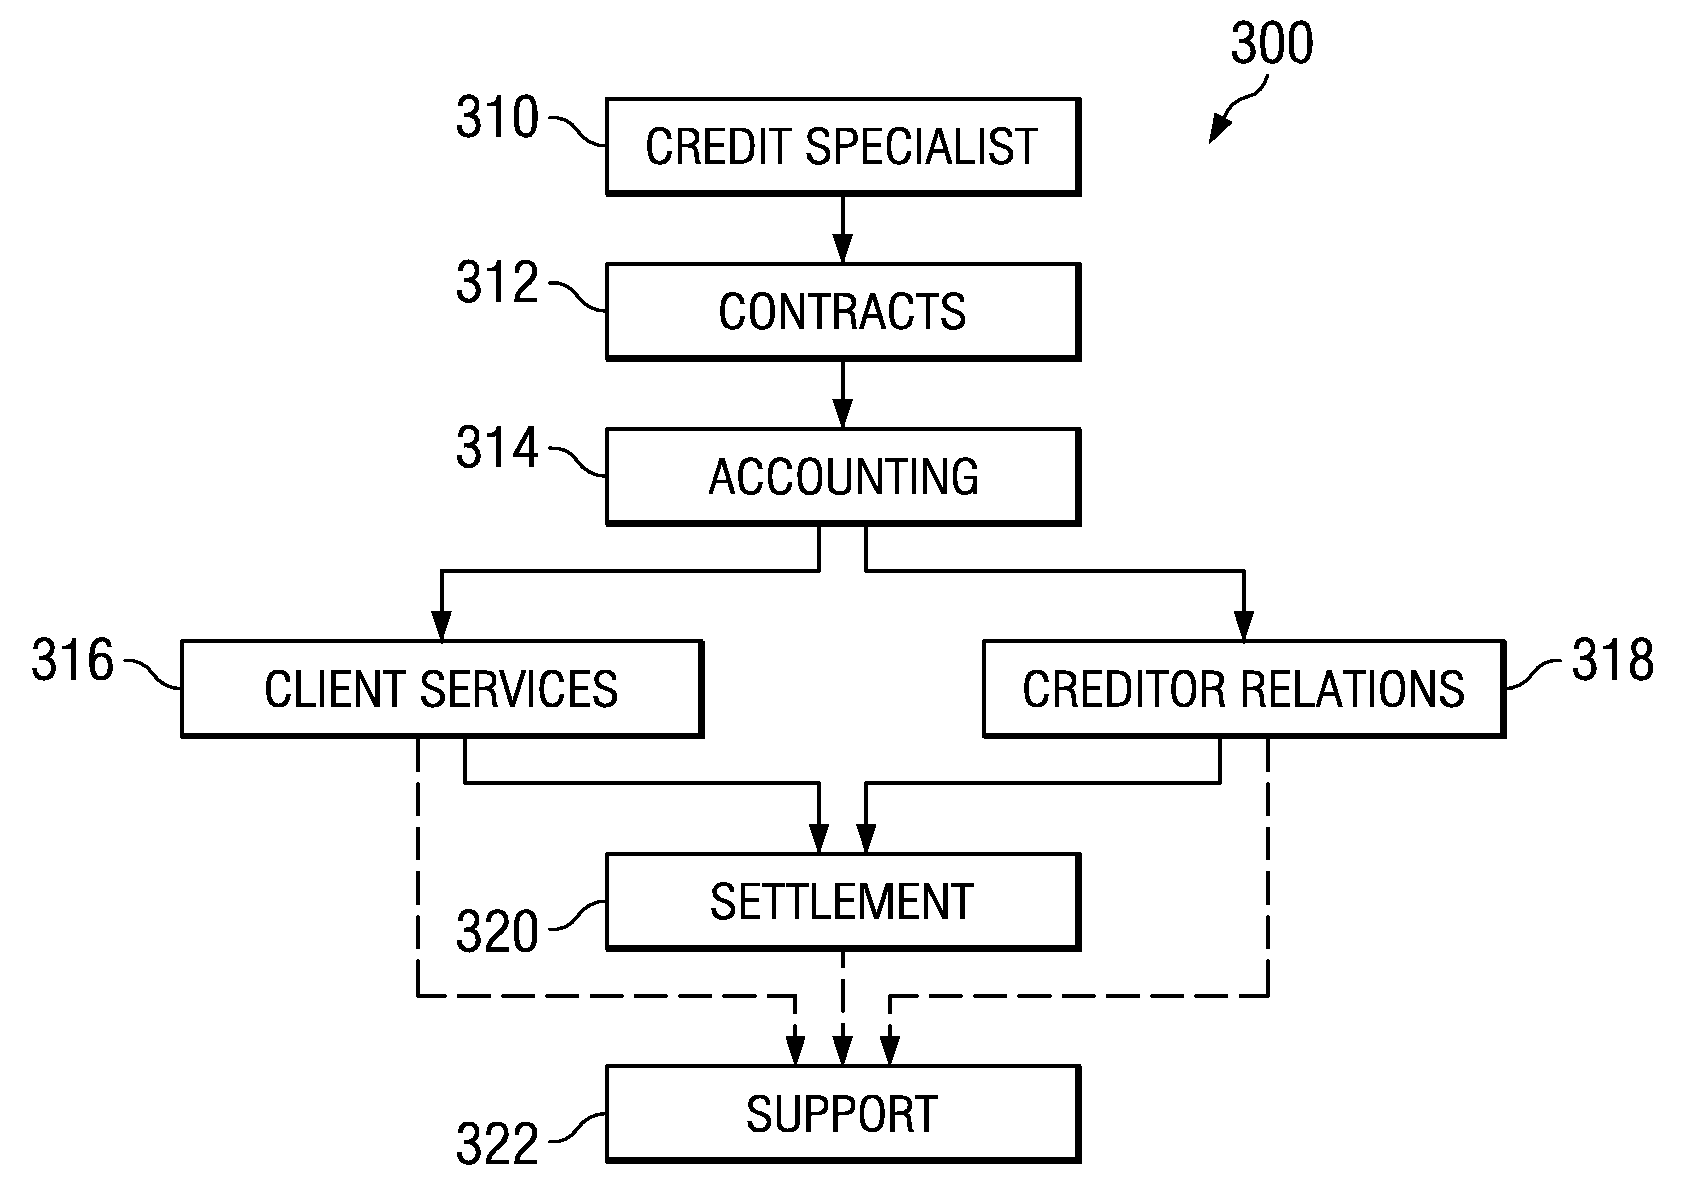 Computerized credit services information management system